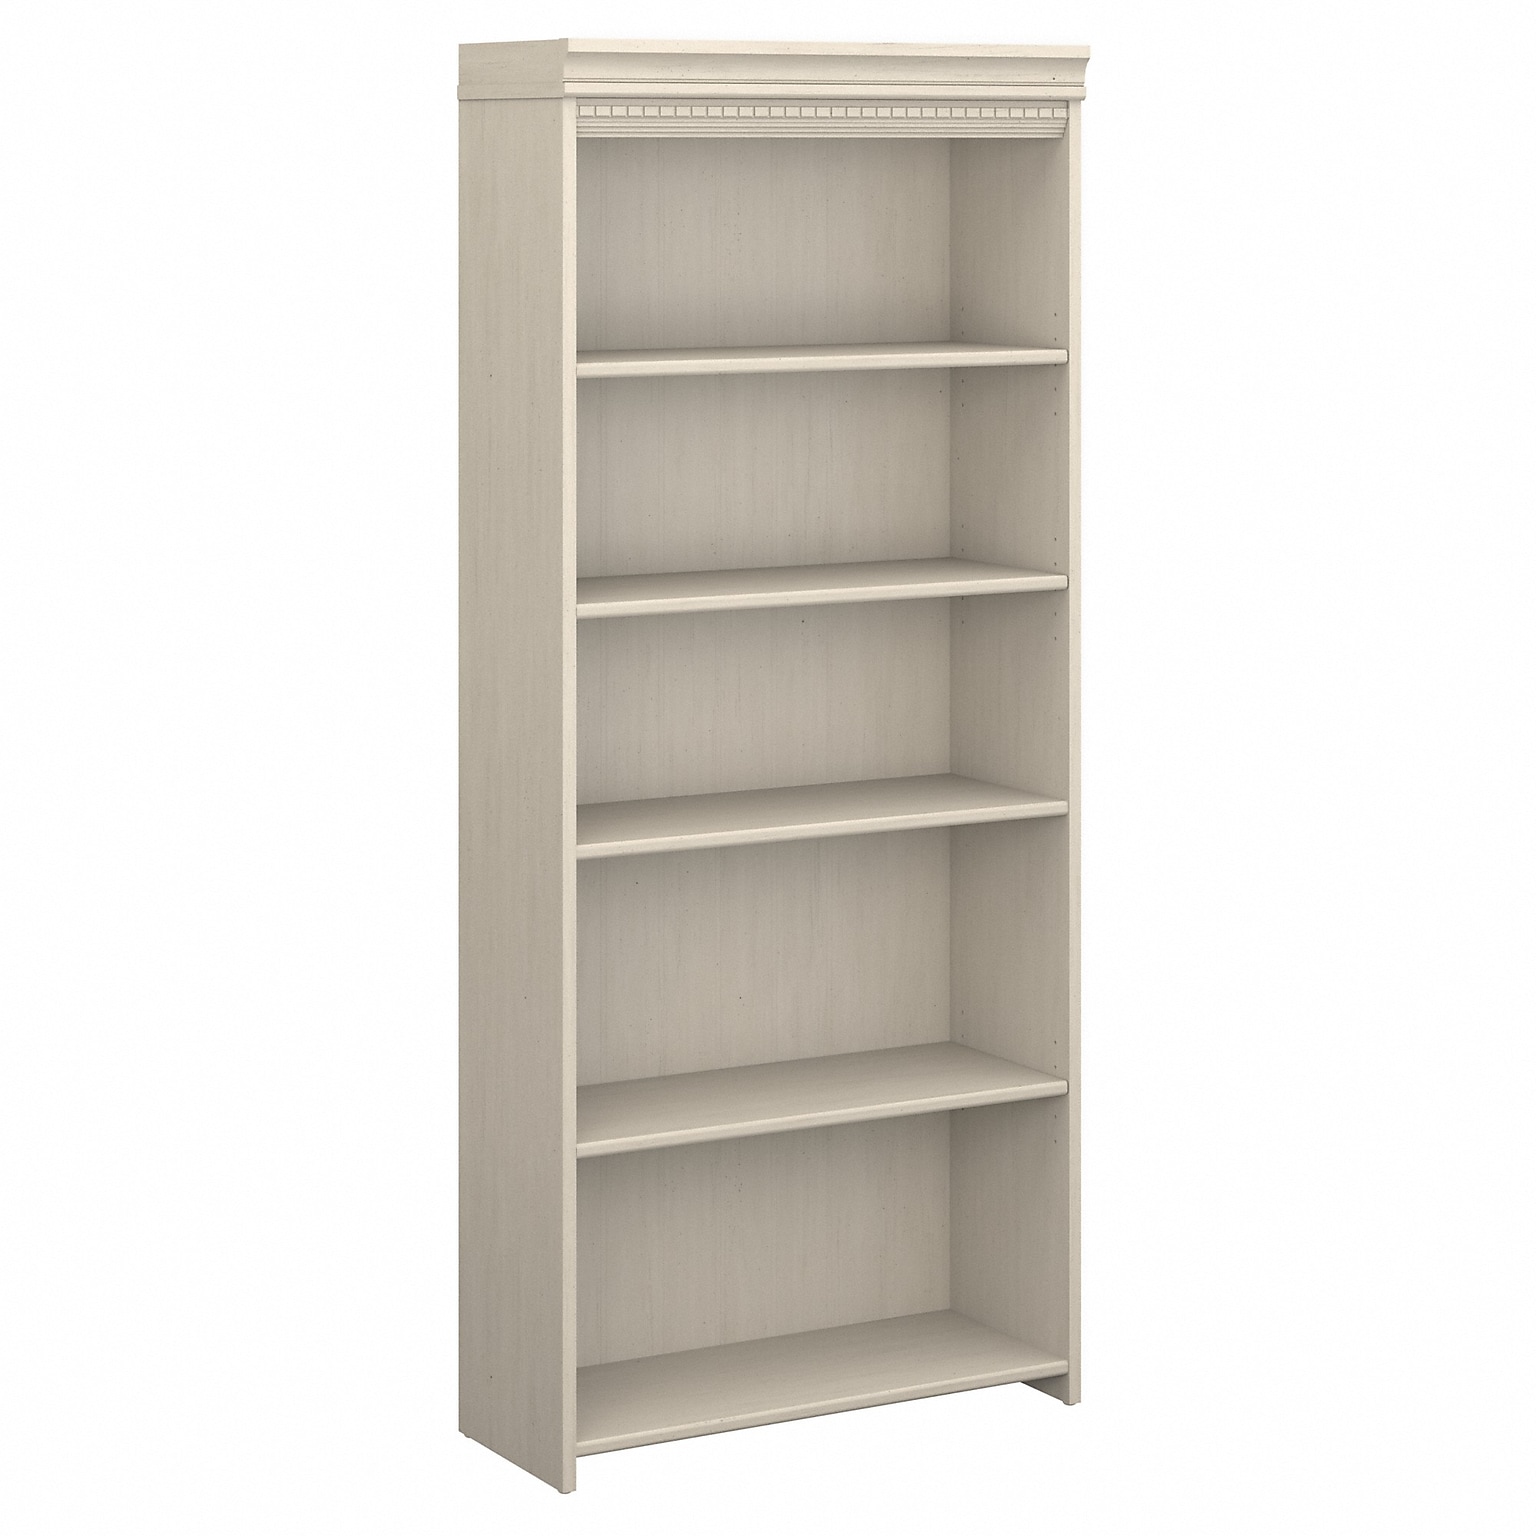 Bush Furniture Fairview Collection 69H 5-Shelf Bookcase with Adjustable Shelves, Antique White Laminated Wood (WC53265-03)